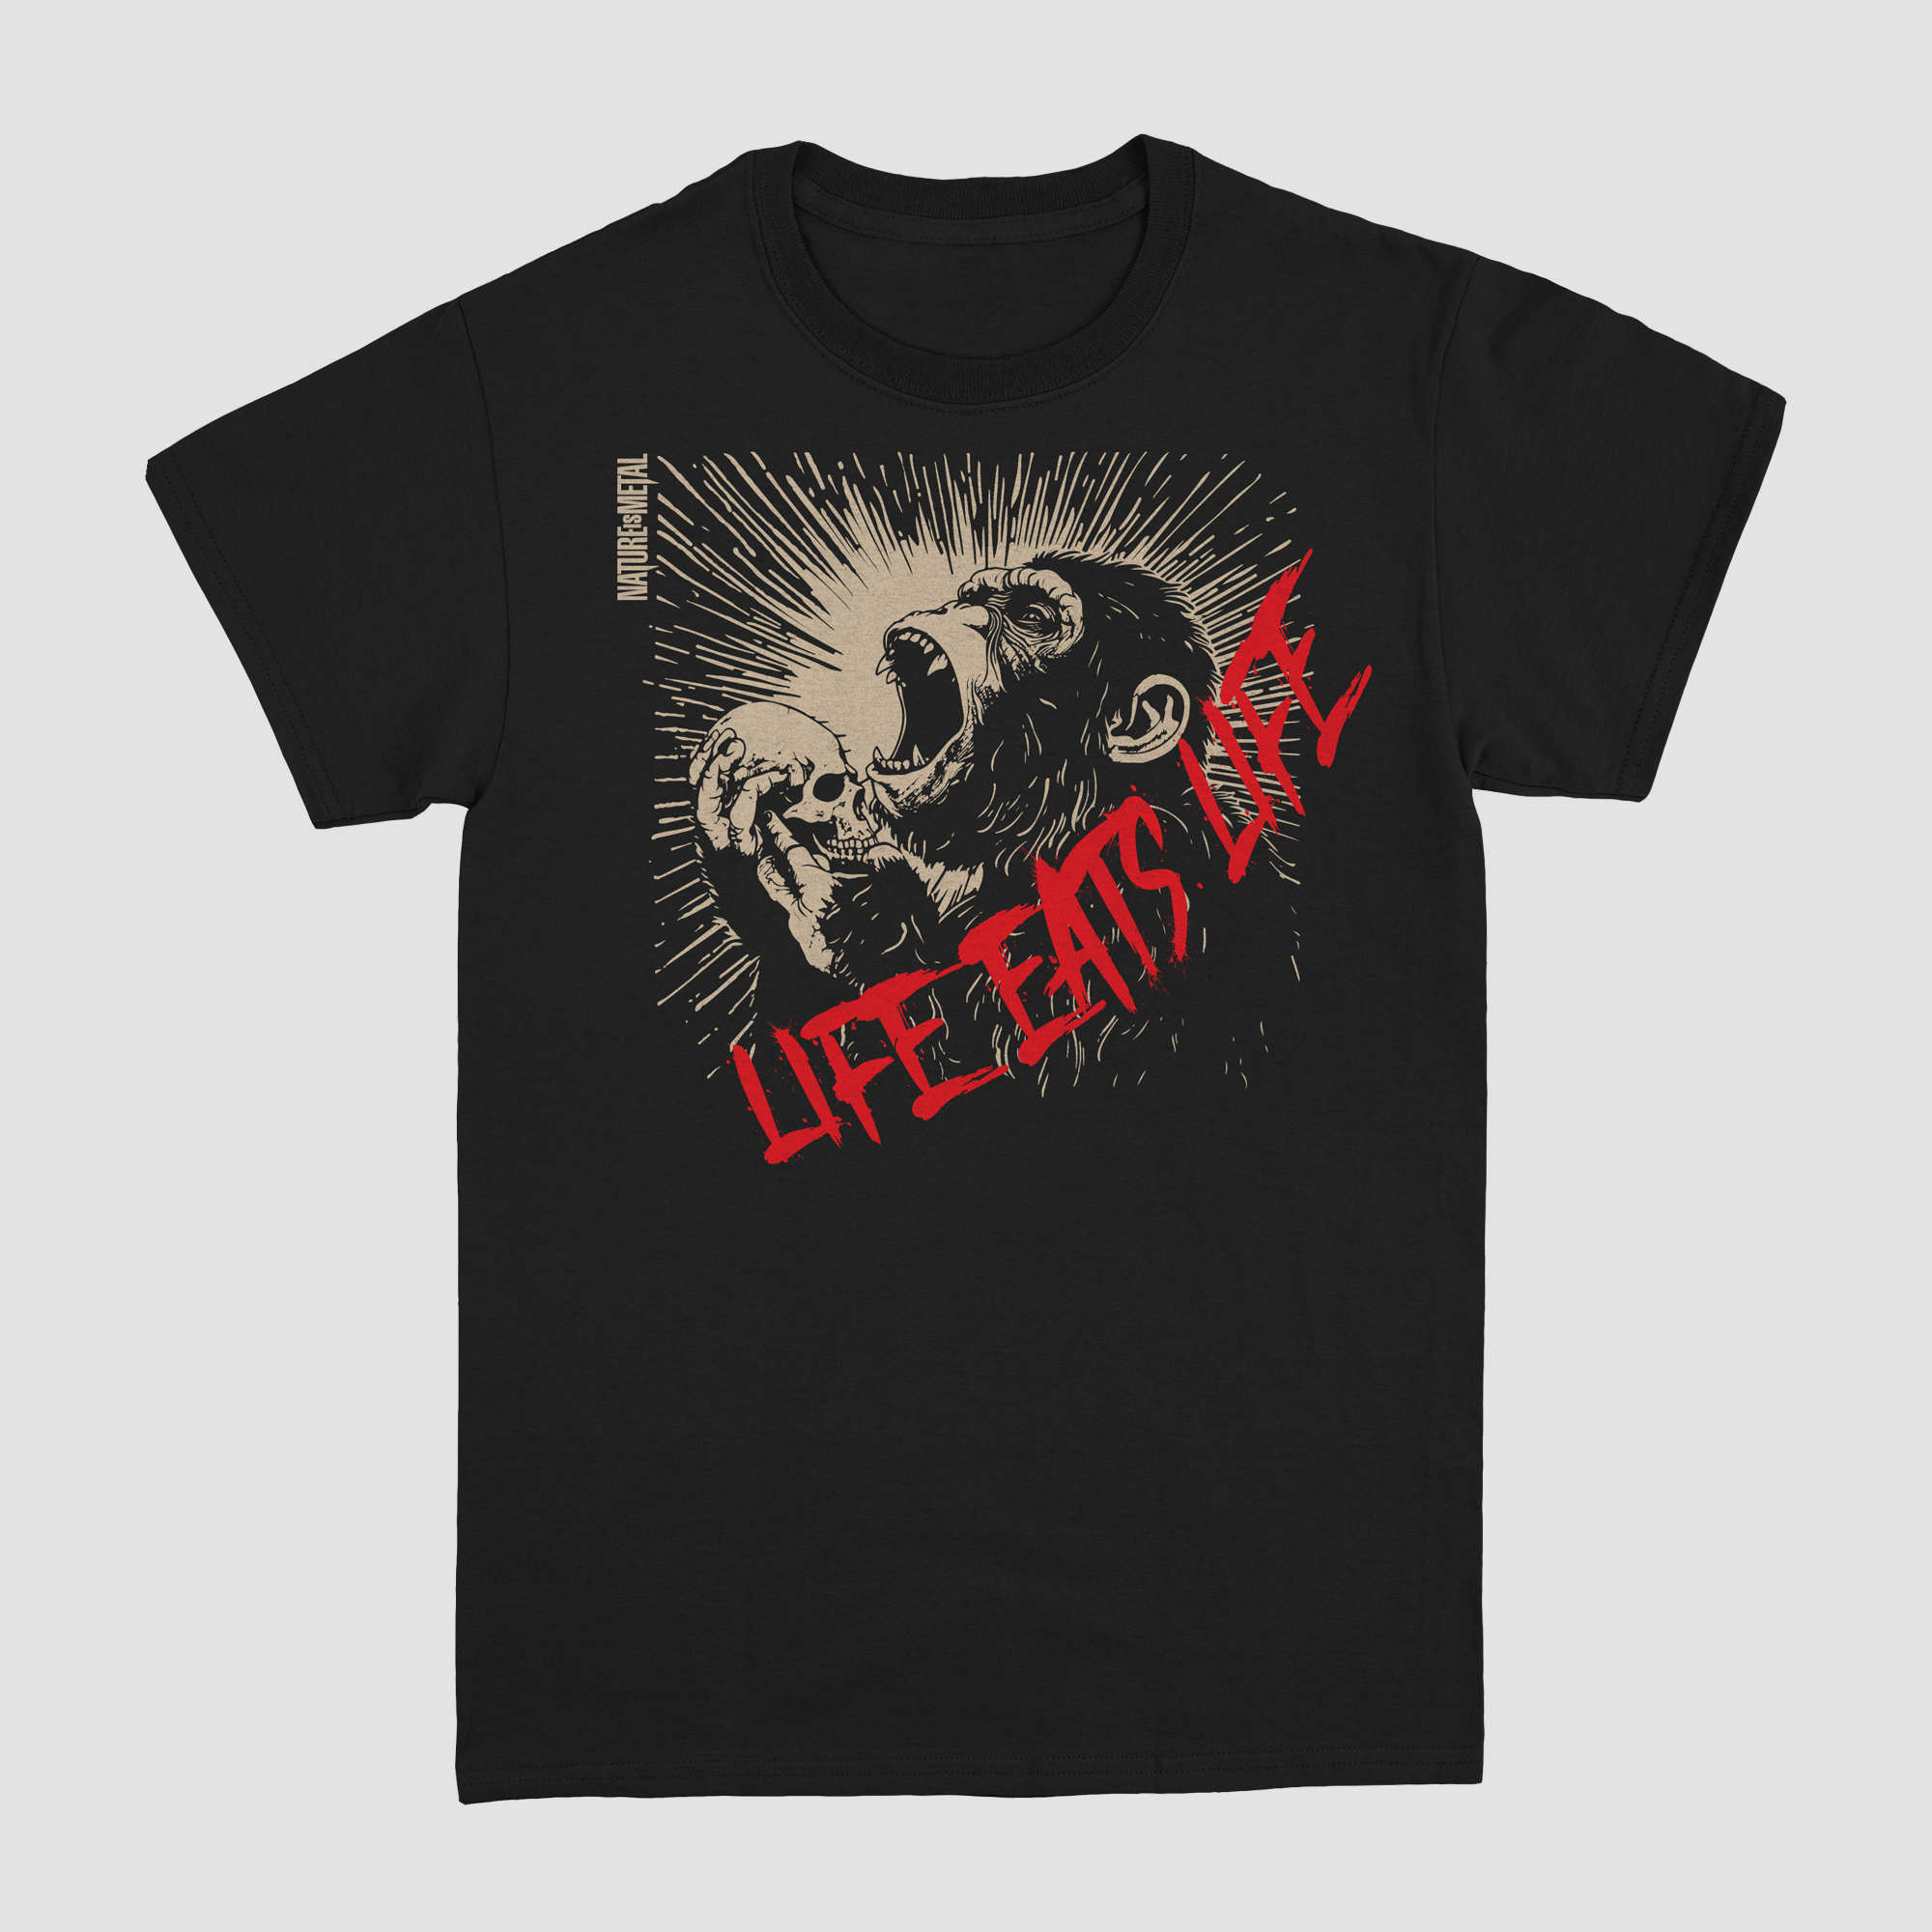 Screaming Ape "Limited Edition" T-Shirt